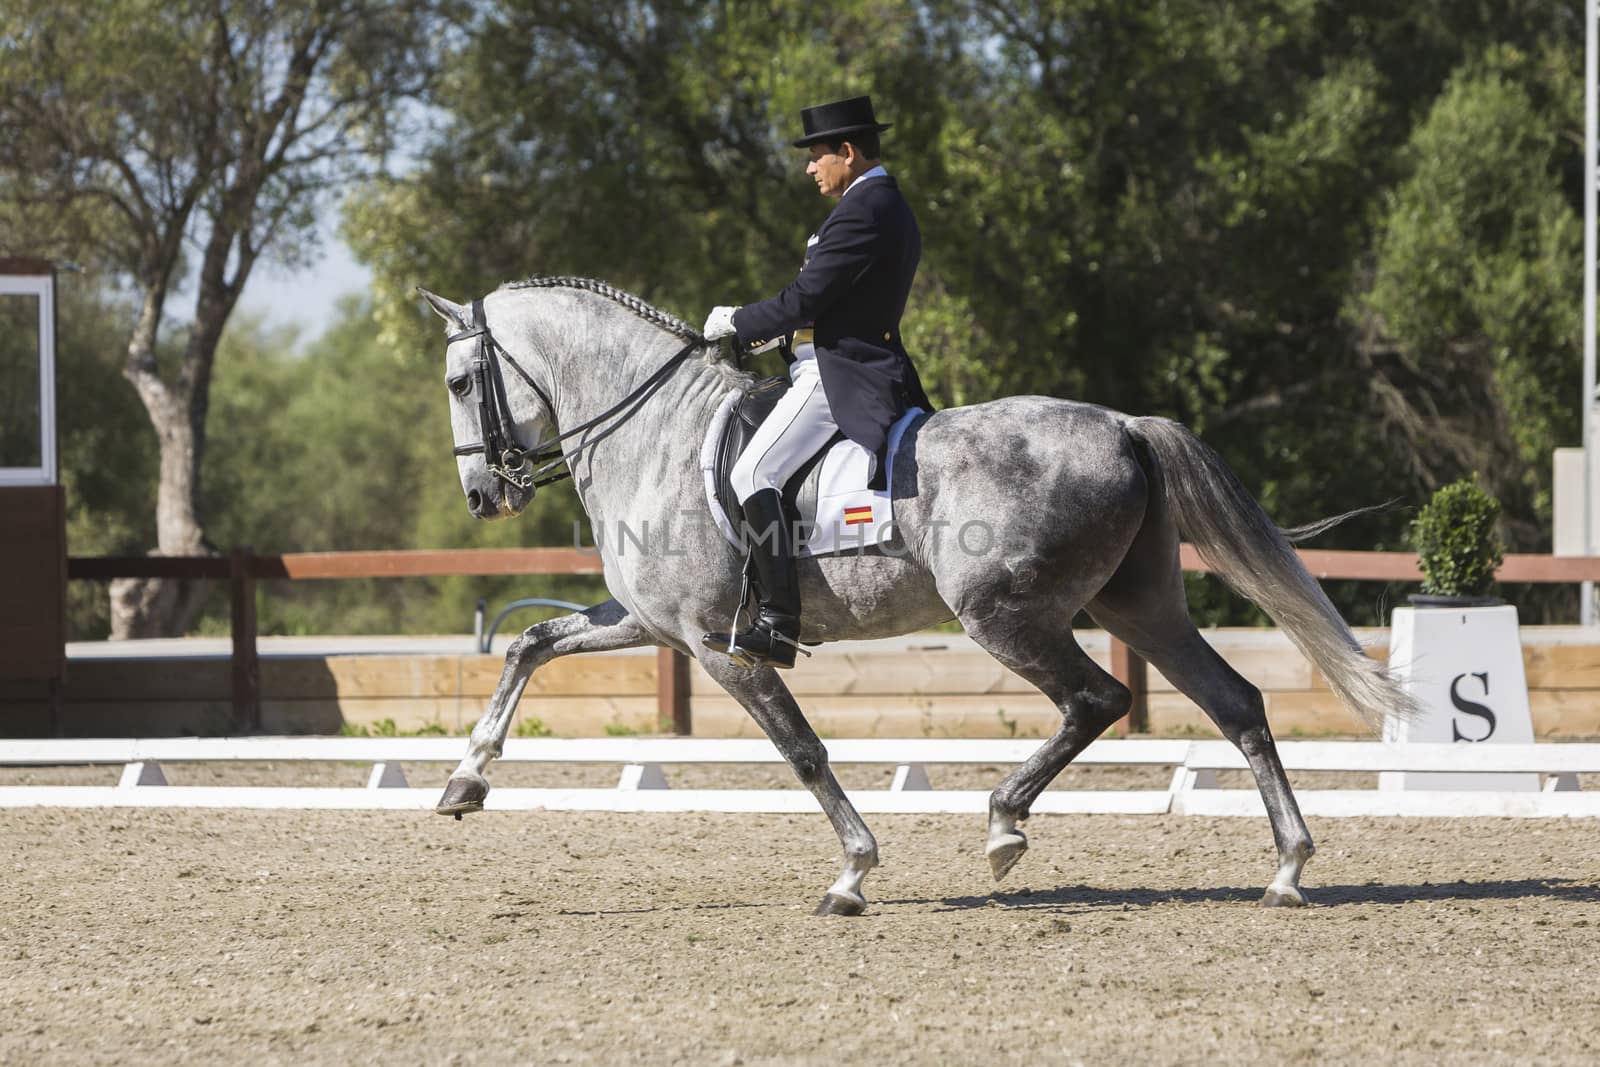 Spanish purebred horse competing in dressage competition classic by digicomphoto